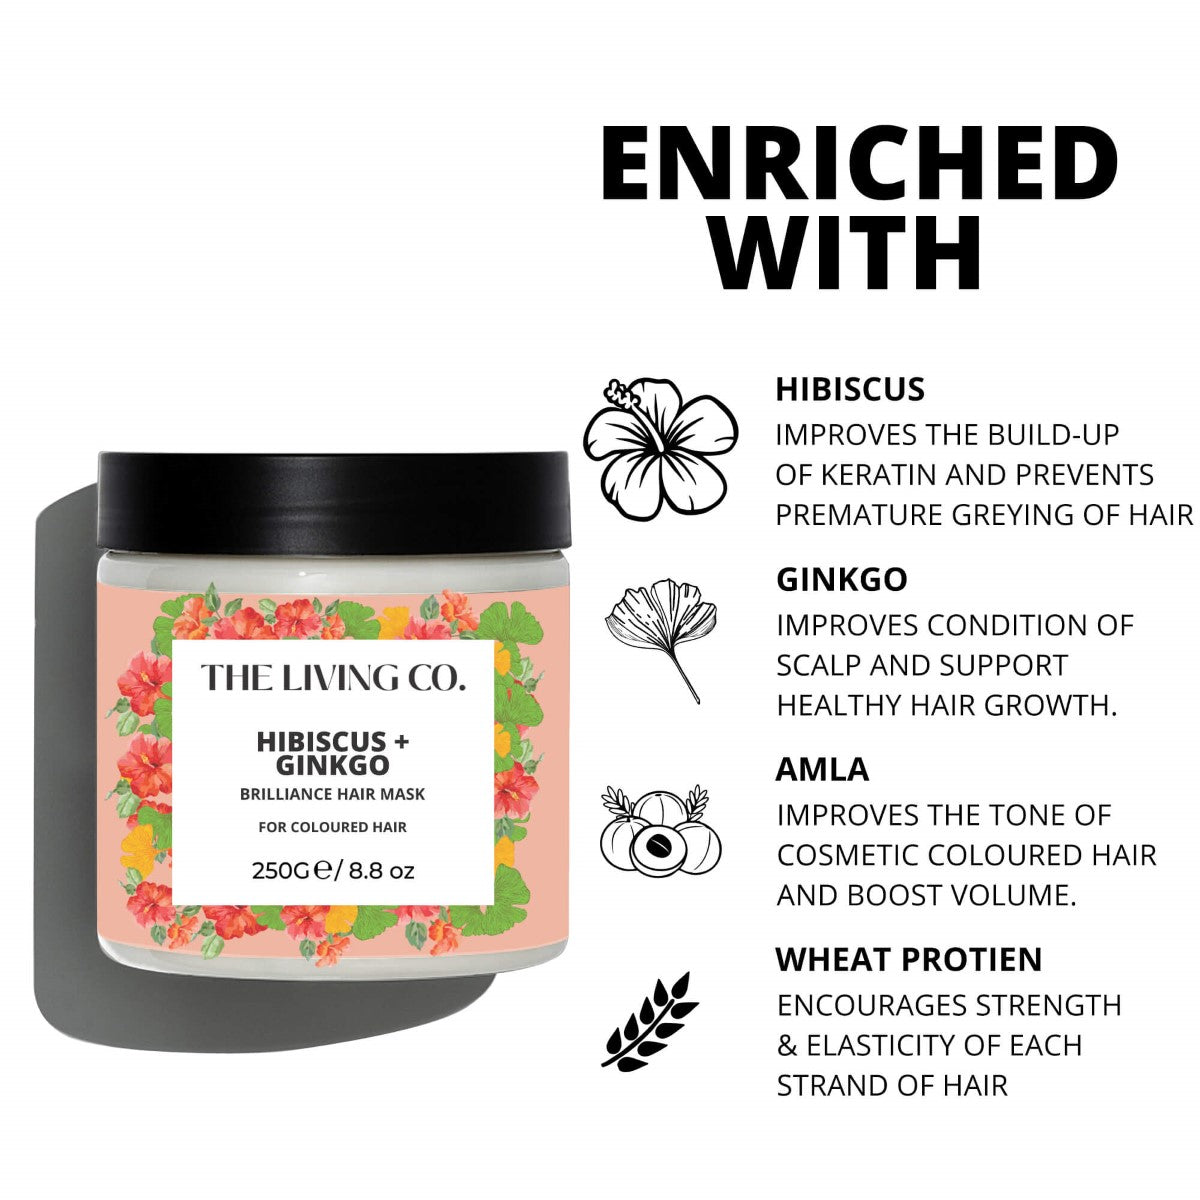 Brilliance Hair Mask With Hibiscus + Ginkgo